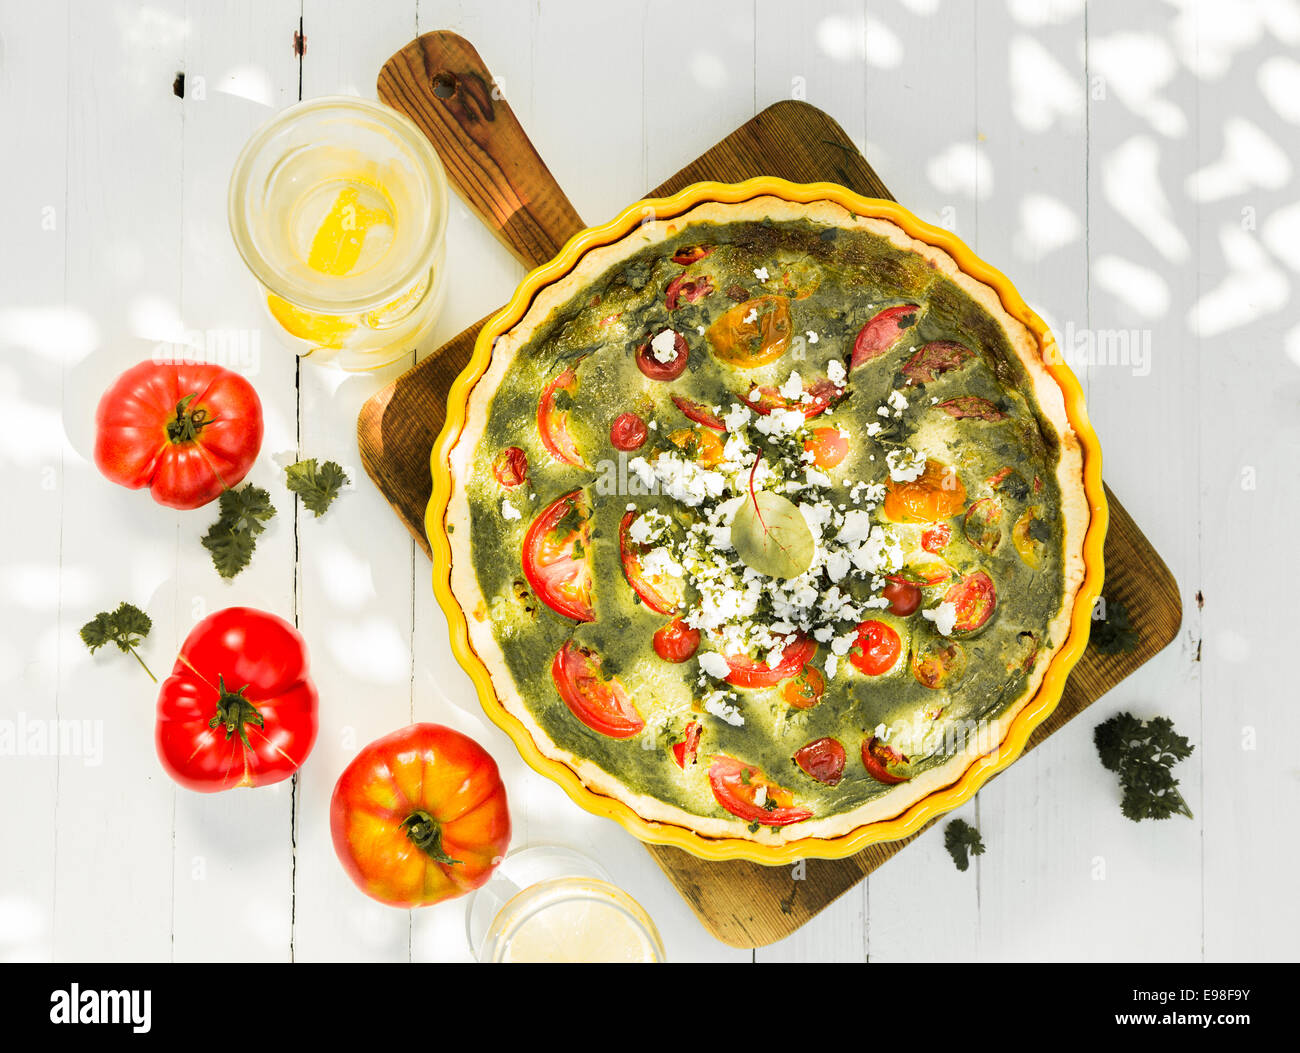 Savory quiche with egg, tomatoes, cheese and herbs viewed from above on a wooden chopping board with fresh tomatoes on a rustic Stock Photo